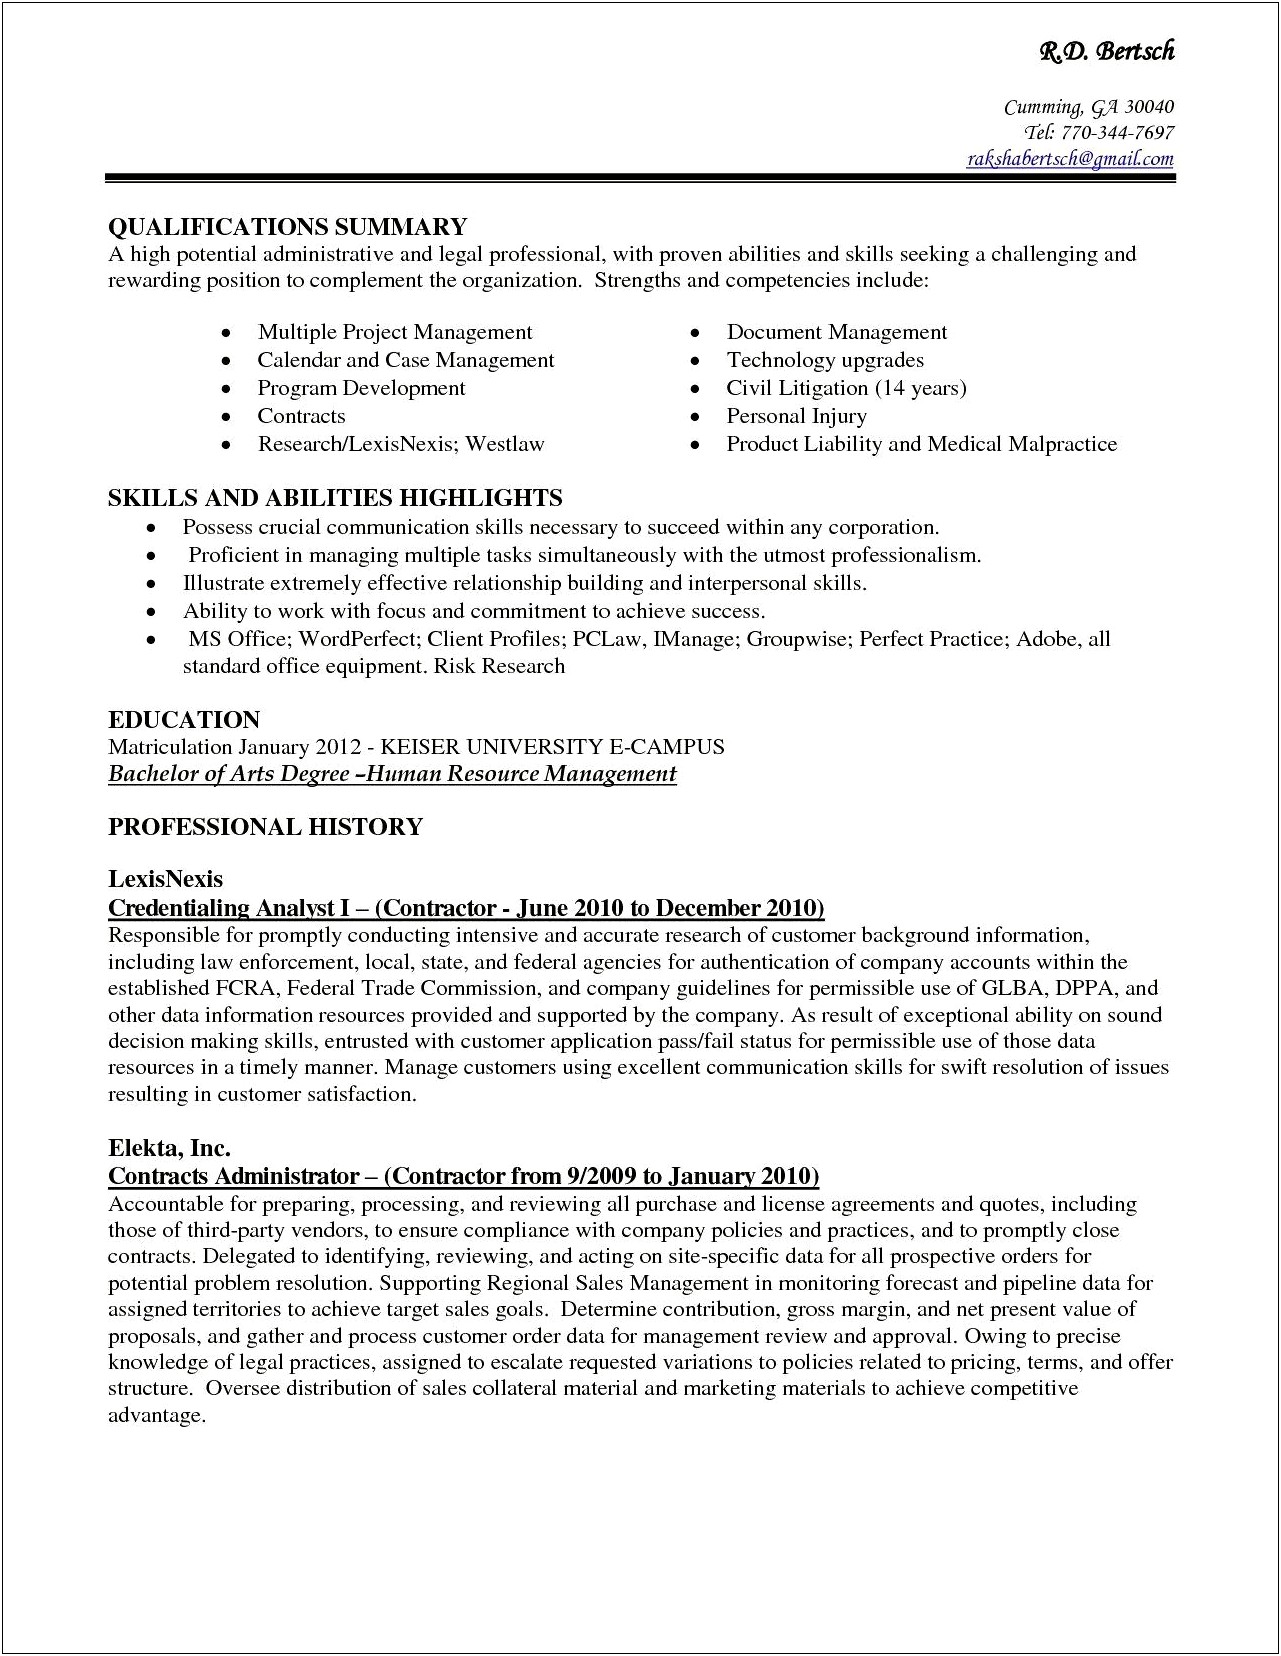 Skills And Abilities Part Of Resume